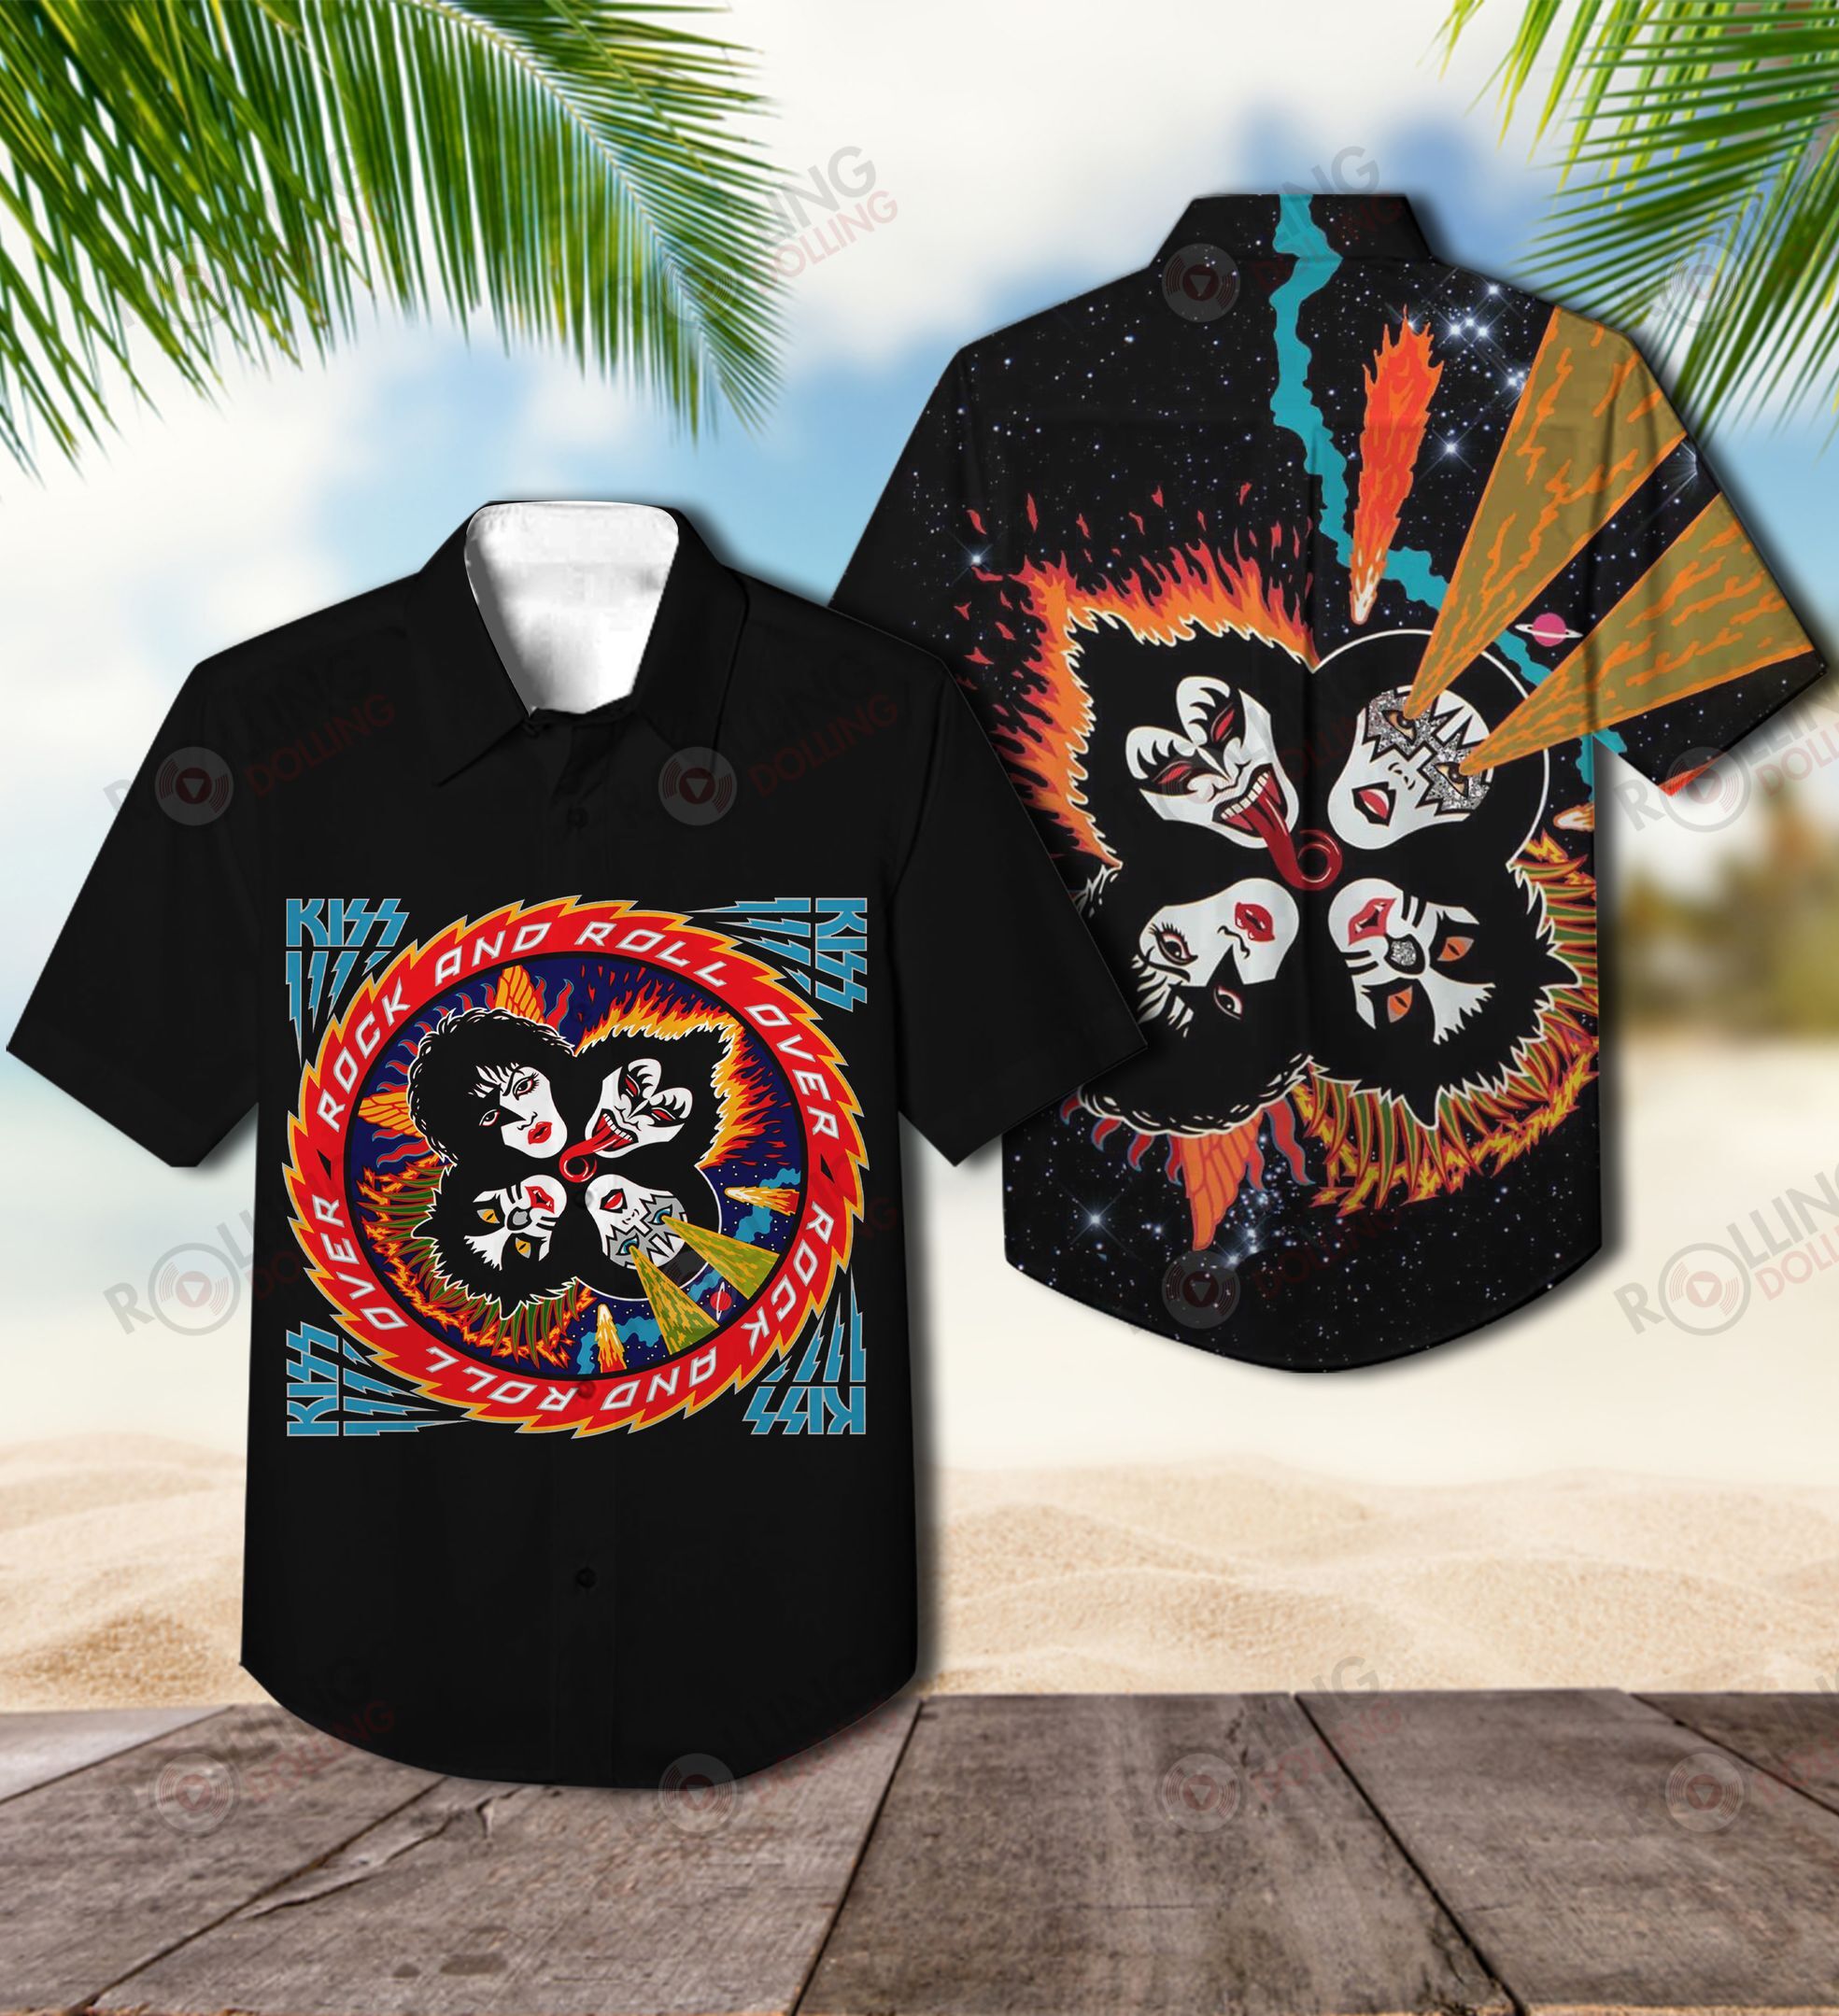 This would make a great gift for any fan who loves Hawaiian Shirt as well as Rock band 39